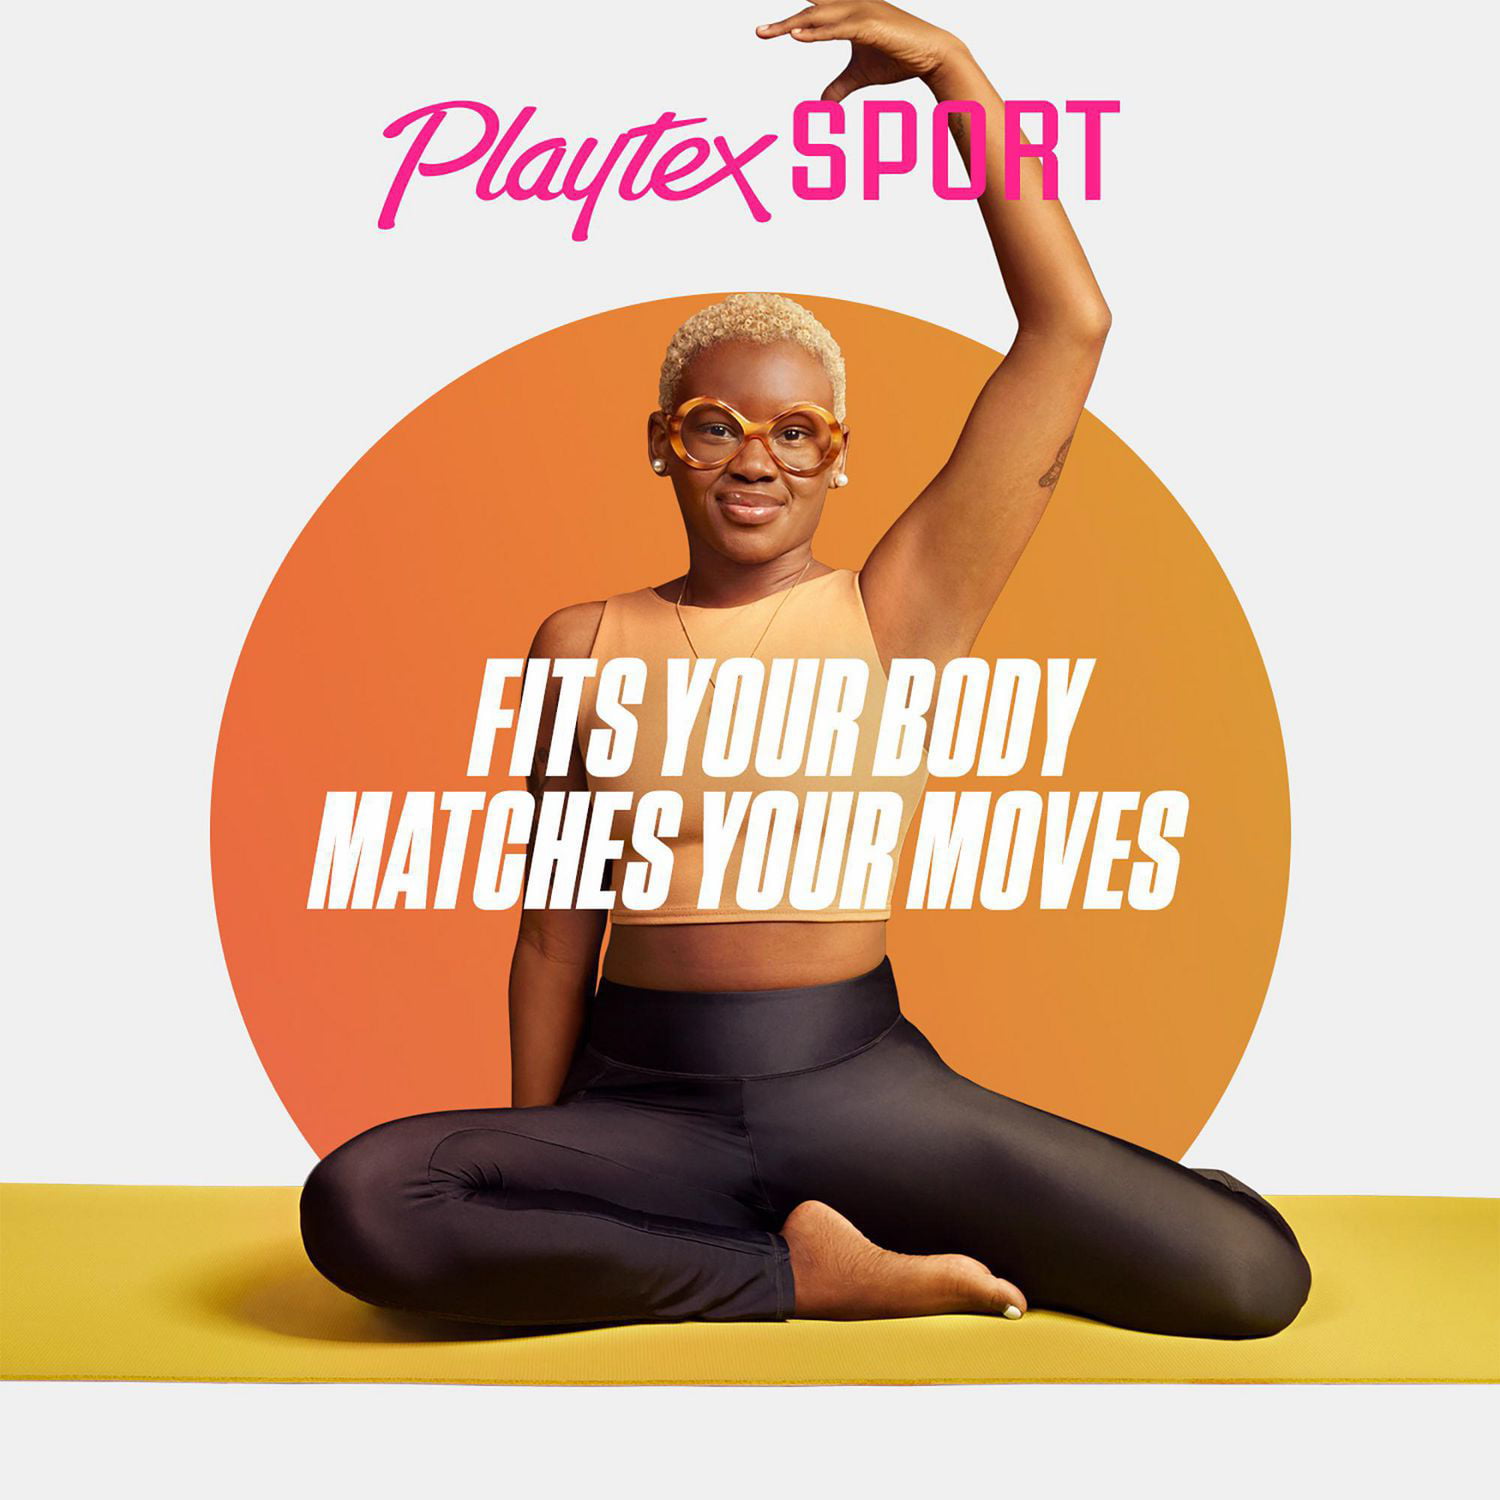 Playtex - Keeping you comfortable as your body changes